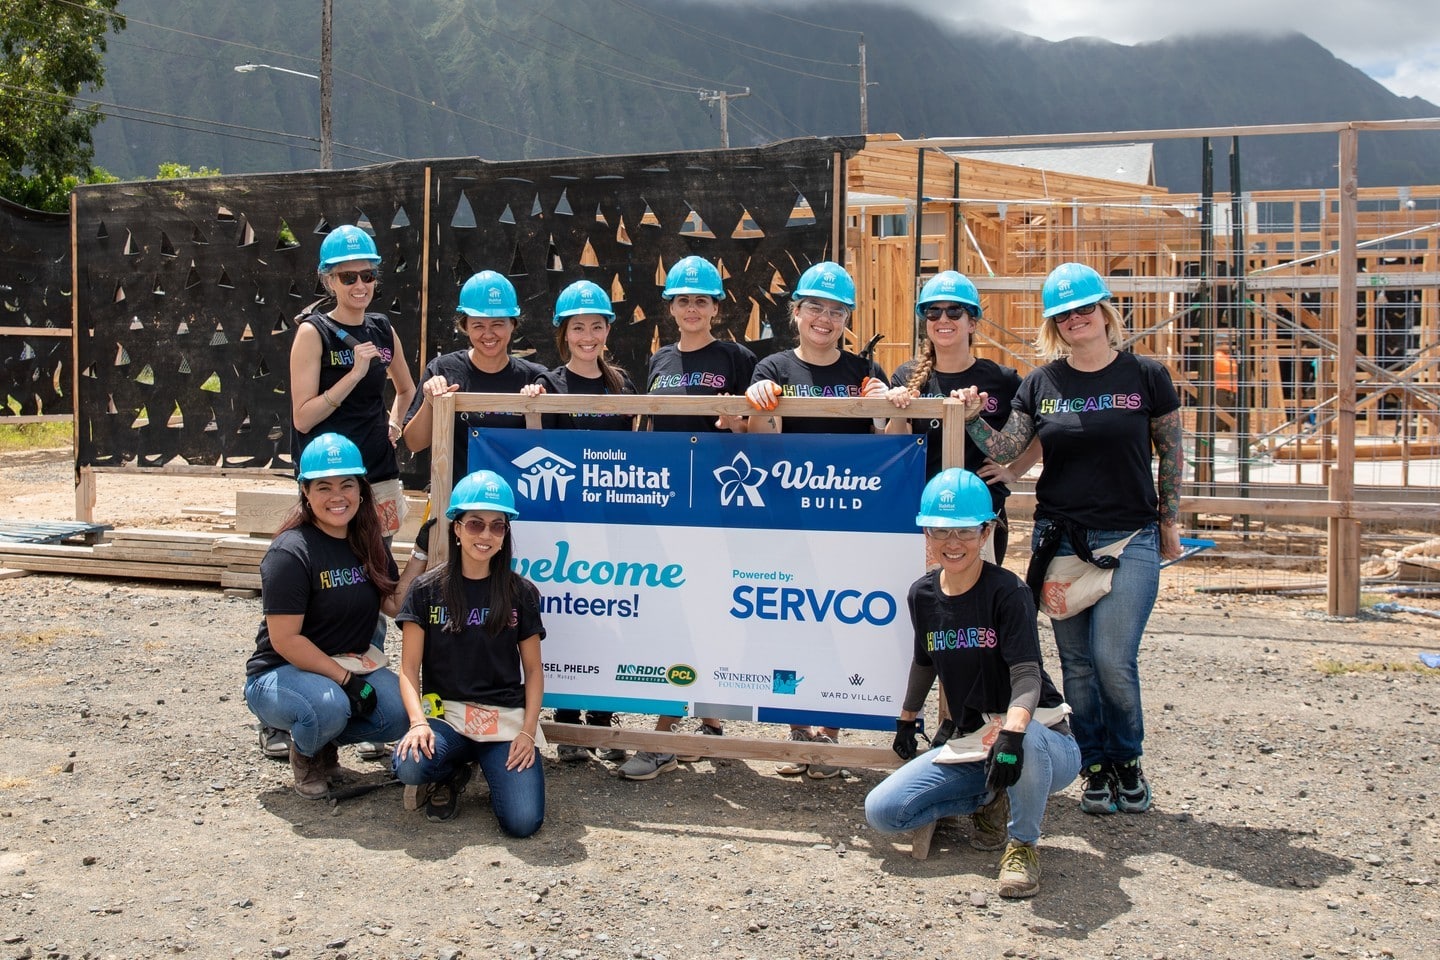 We are proud to once again host a build day this coming May with the
@honoluluhabitat Wahine Build program, a community-wide project to mobilize,
educate, and empower women to build and advocate for affordable housing on
Oʻahu. This spring, more than 200 women will build a Habitat for Humanity
home from foundation to finish. Visit the link in our bio to learn more.